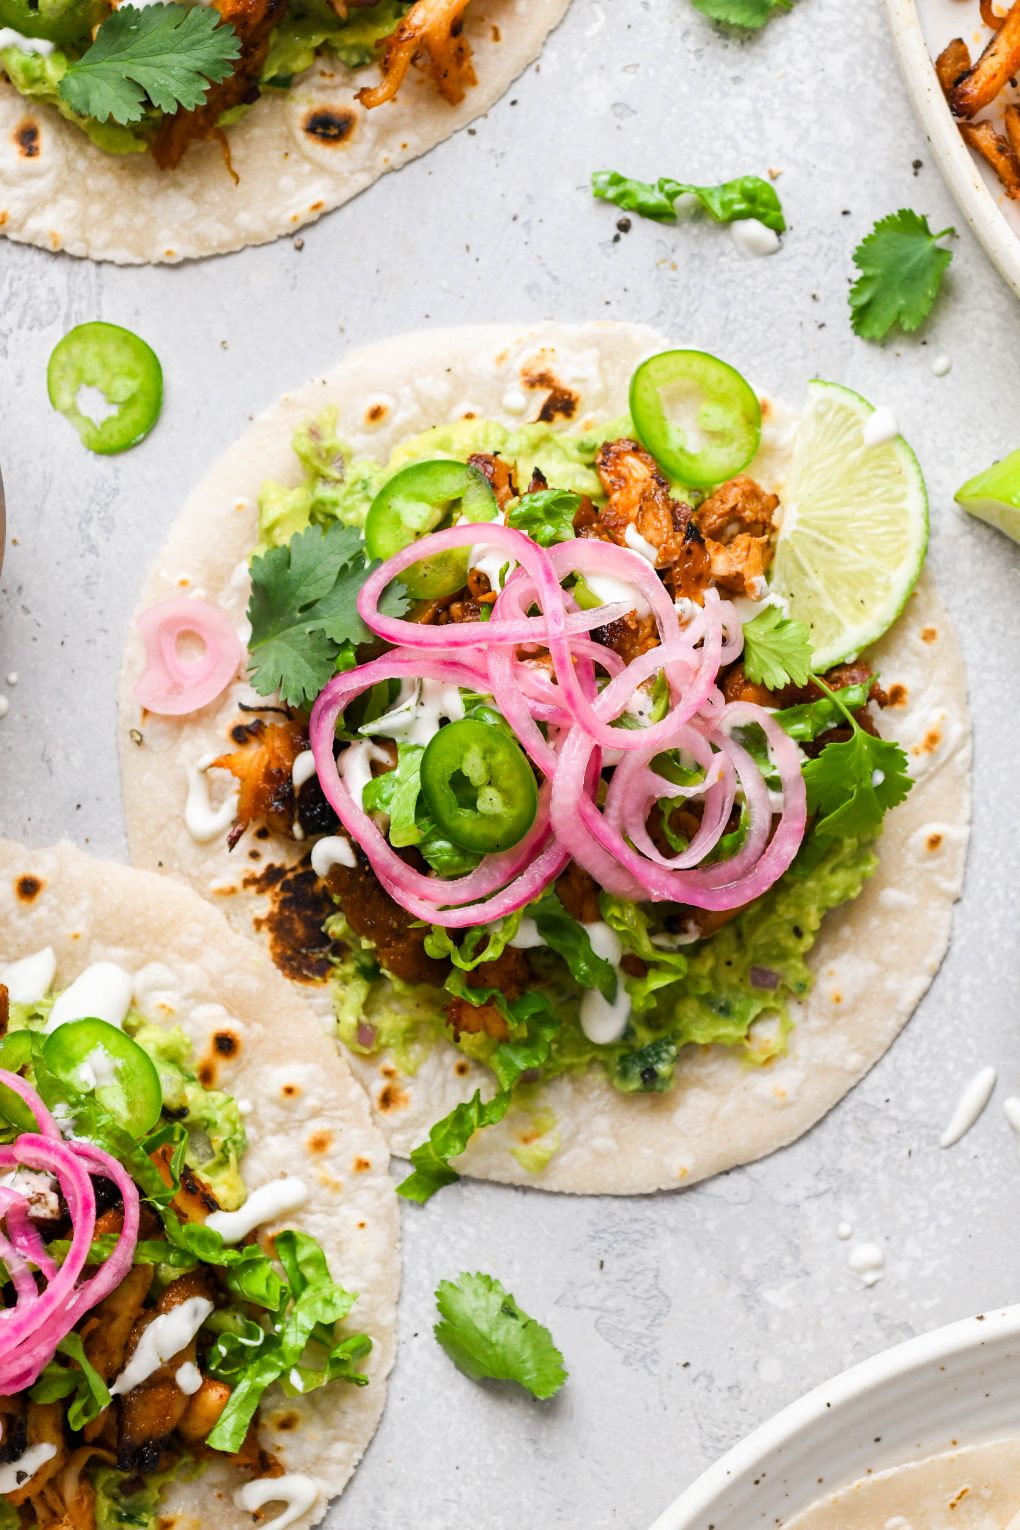 Overhead image of a few flat laid tacos on a light colored surface. They are shredded chicken tacos filled with shredded romaine, sliced jalapeno, dairy free sour cream, guacamole, cilantro, and pickled red onions.